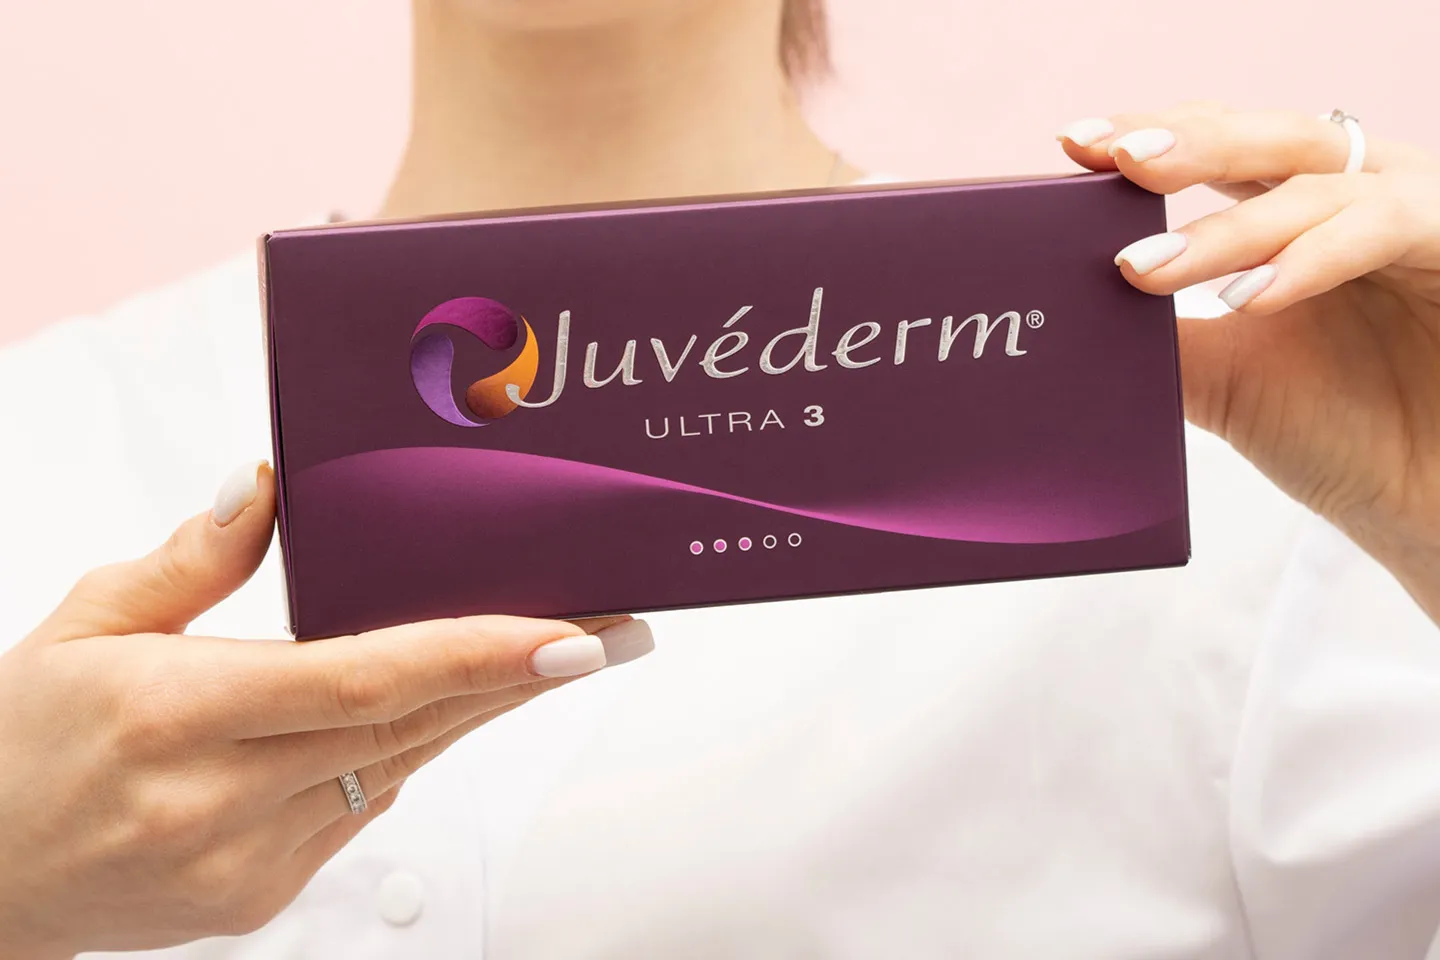 Youthful skin filler treatment with juvederm